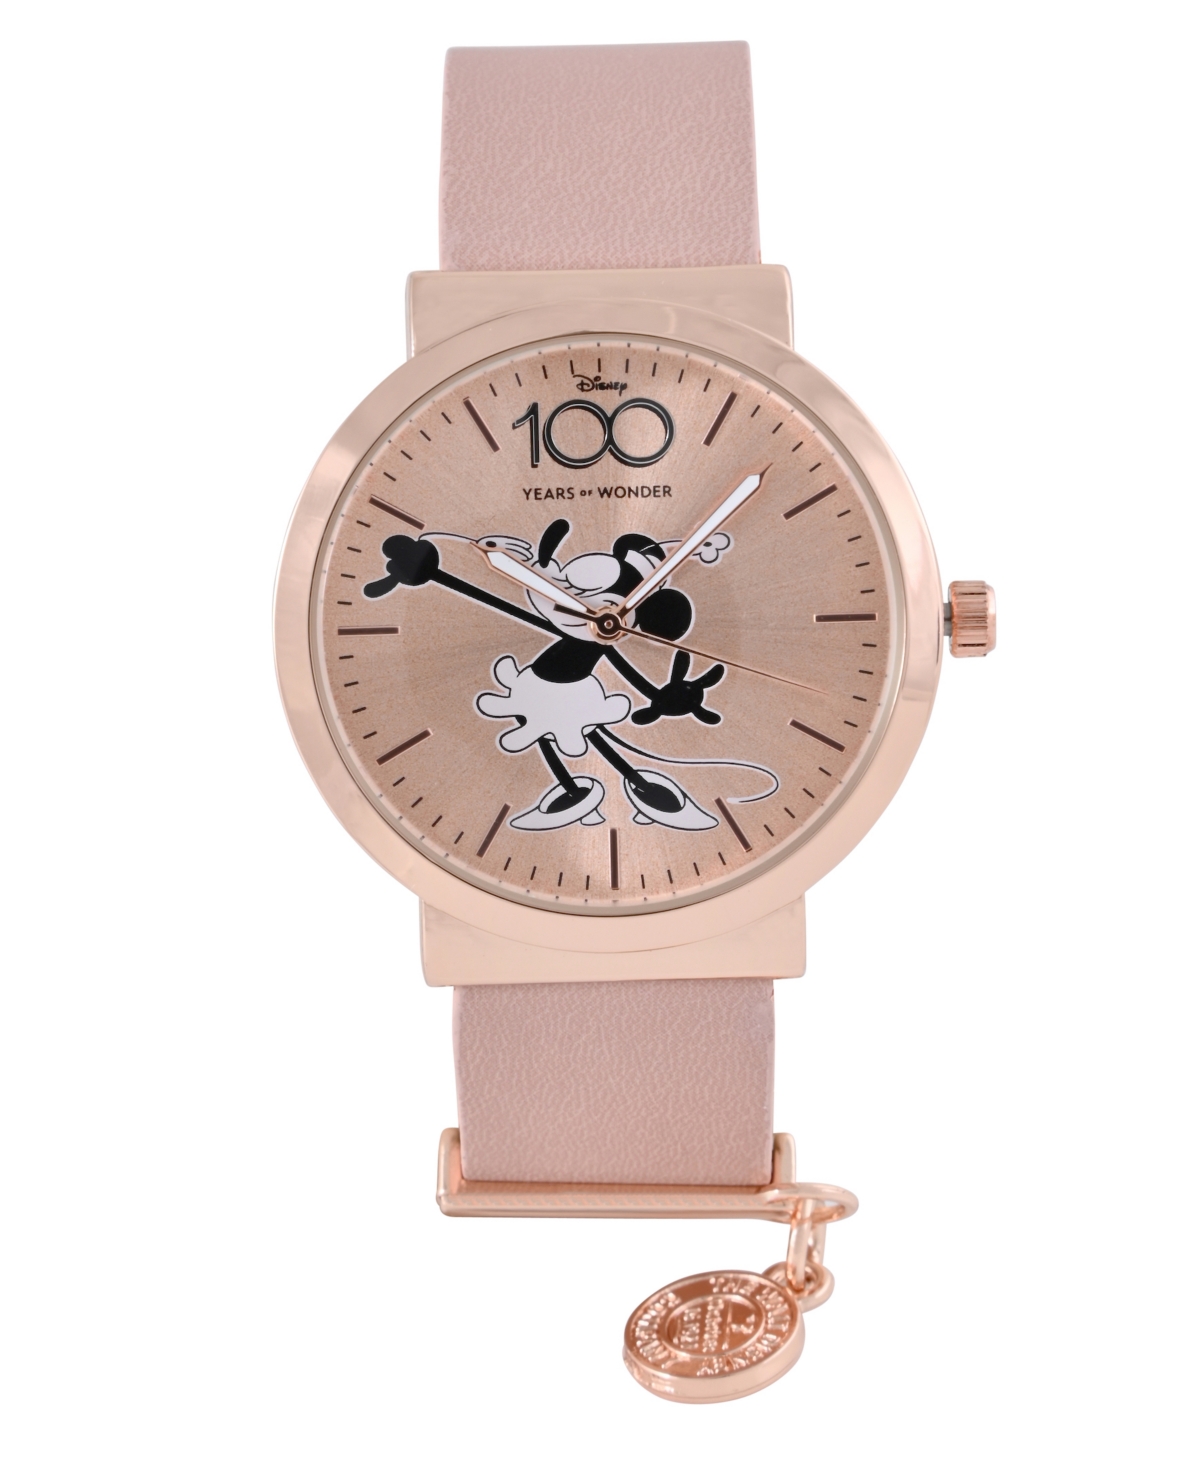 Women's Disney 100th Anniversary Analog Pink Faux Leather Watch 32mm - Pink